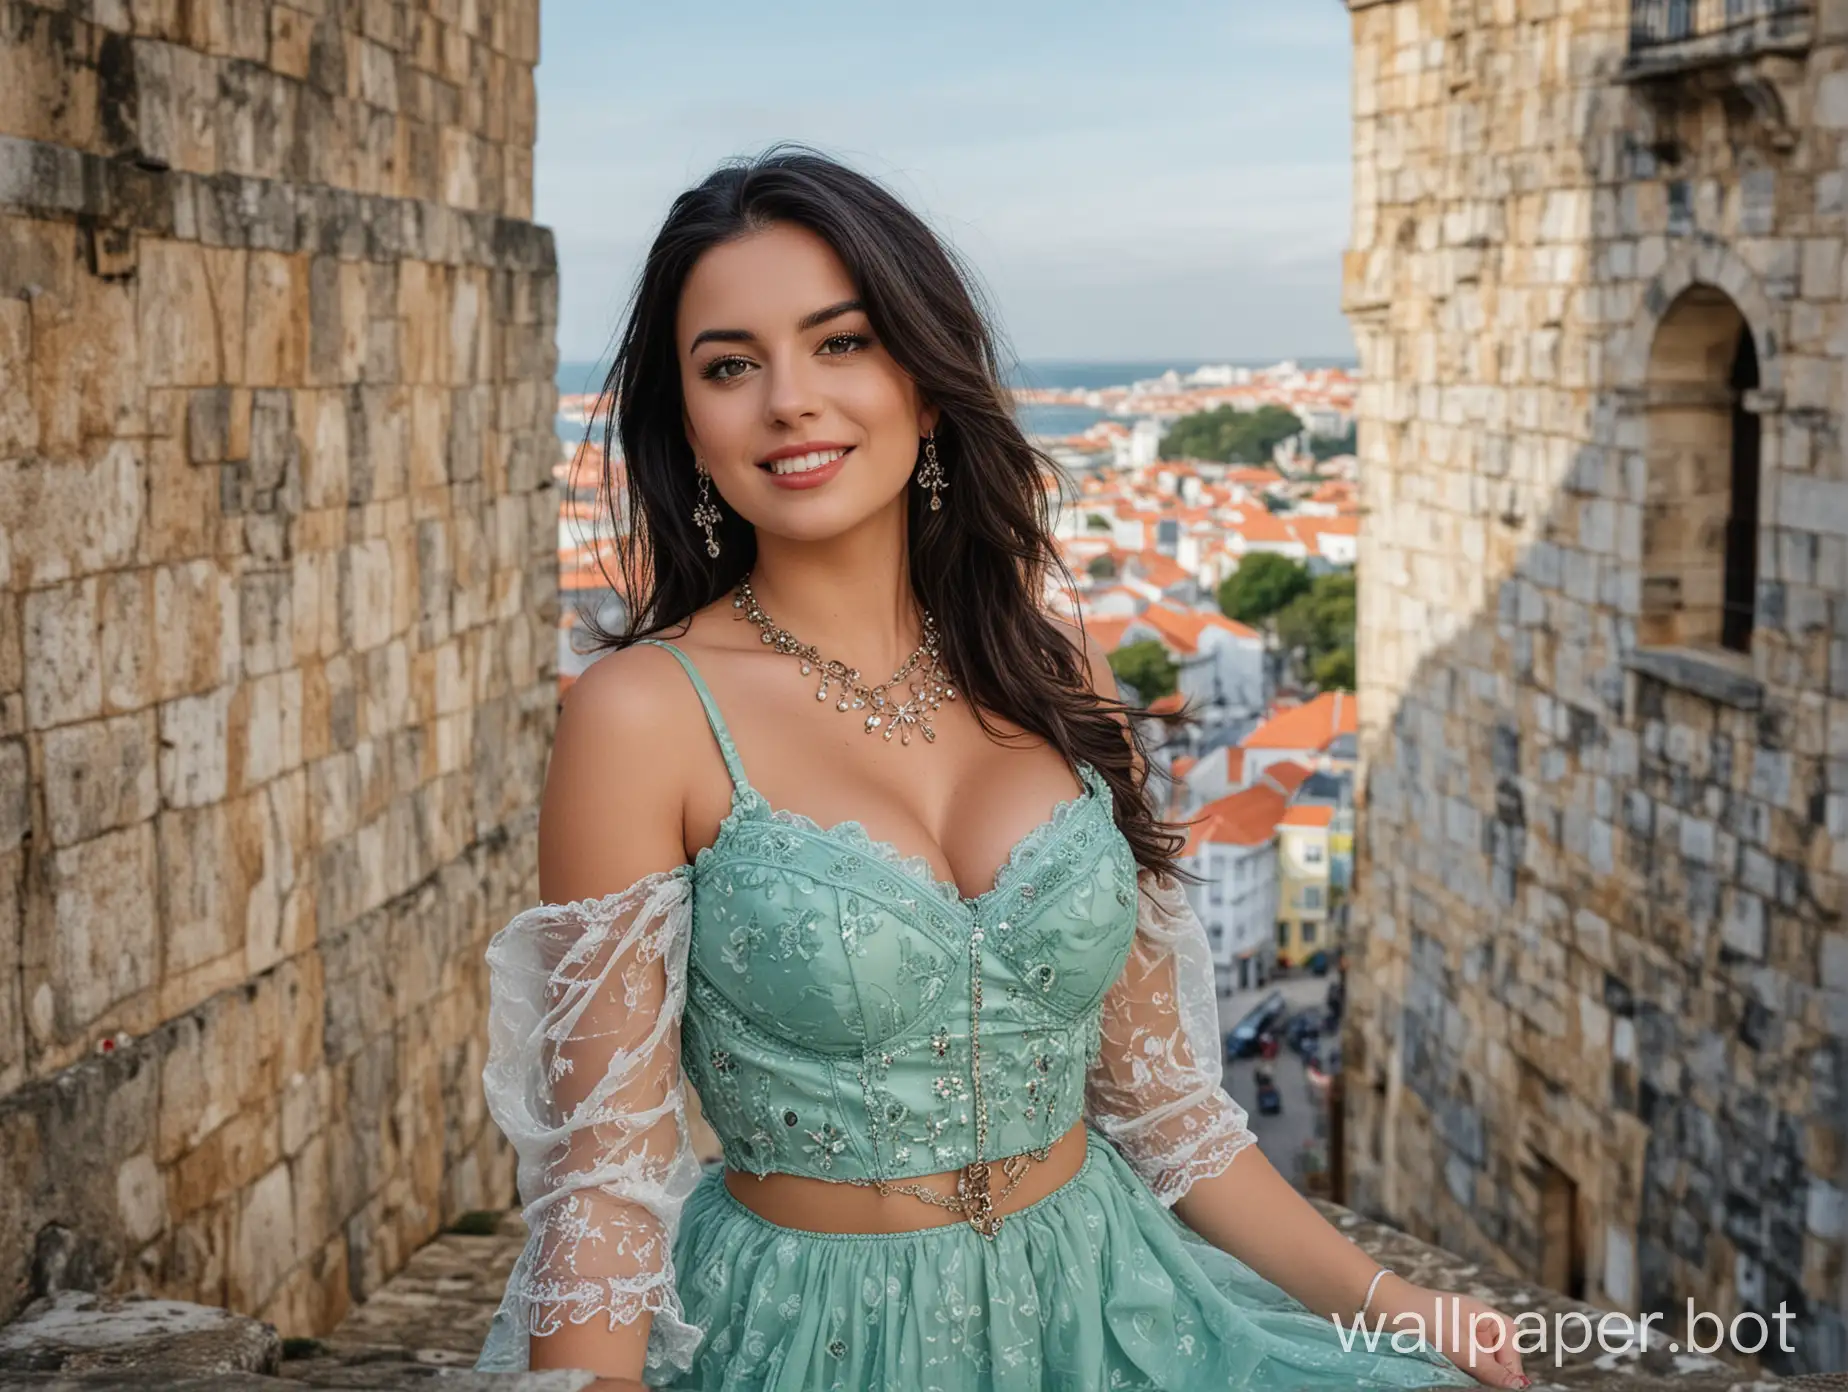 camera shot head to feet full shot.
Generate an image of most beautiful Portugal
 actress 30 year old cute pretty big chest busty , big tits , wearing Cyan
 color mesh lingerie dress , with a fair white skin tone and long hair black. She has a round face smile . The background is 1. **Lisbon**: The capital city boasts a captivating blend of historic architecture, vibrant culture, and scenic viewpoints like São Jorge Castle and Belém Tower.
 She is wearing makeup and has a necklace , ear ring and bracelet on.